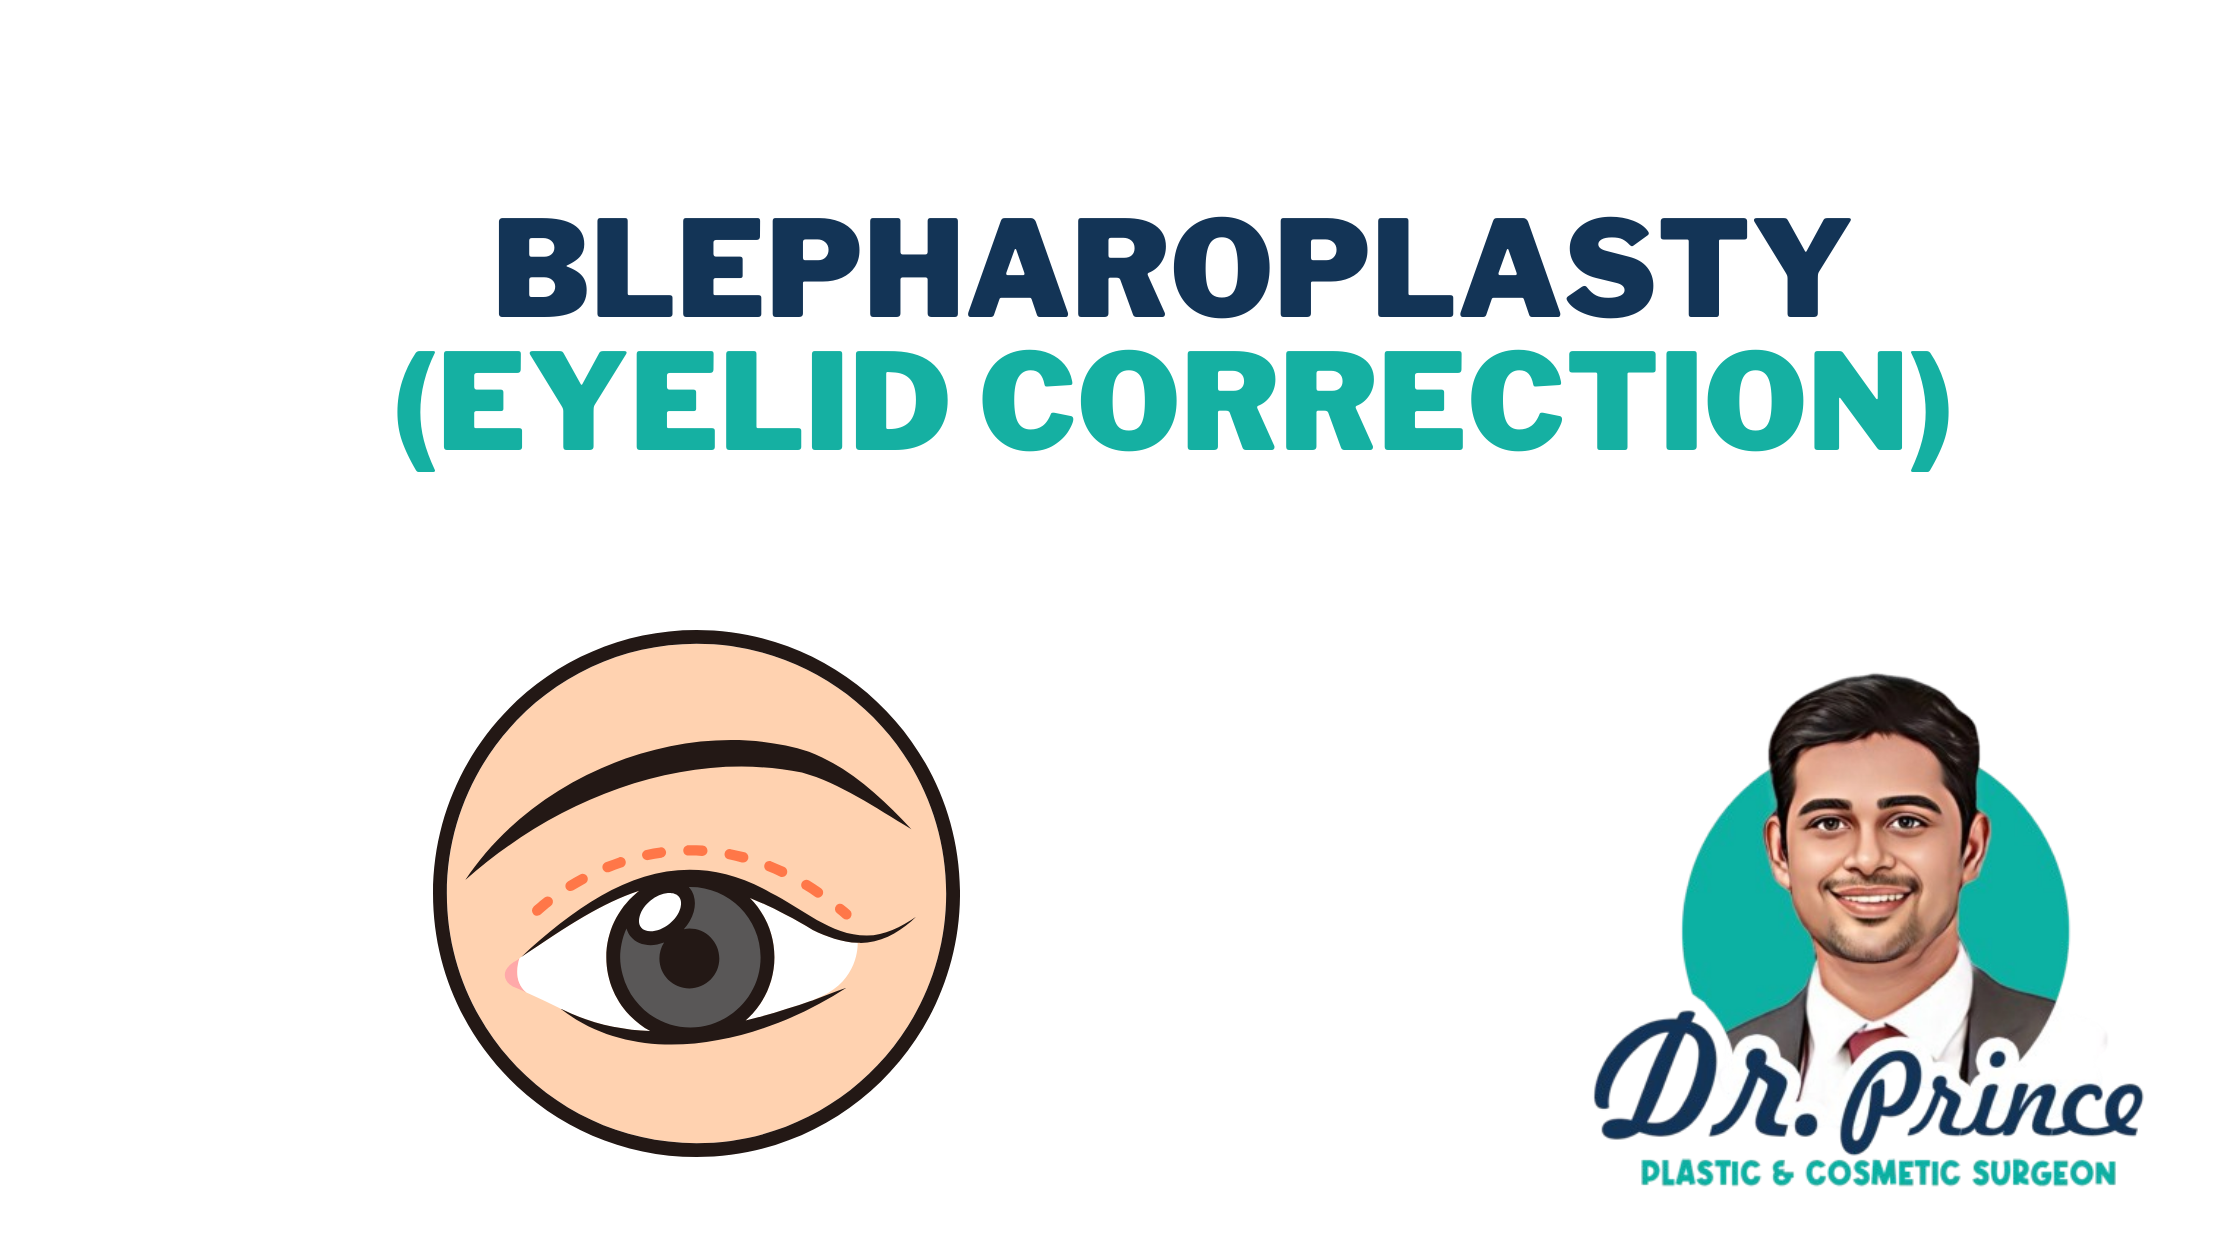 Dr. Prince answering frequently asked questions about Blepharoplasty, the transformative eyelid enhancement procedure.